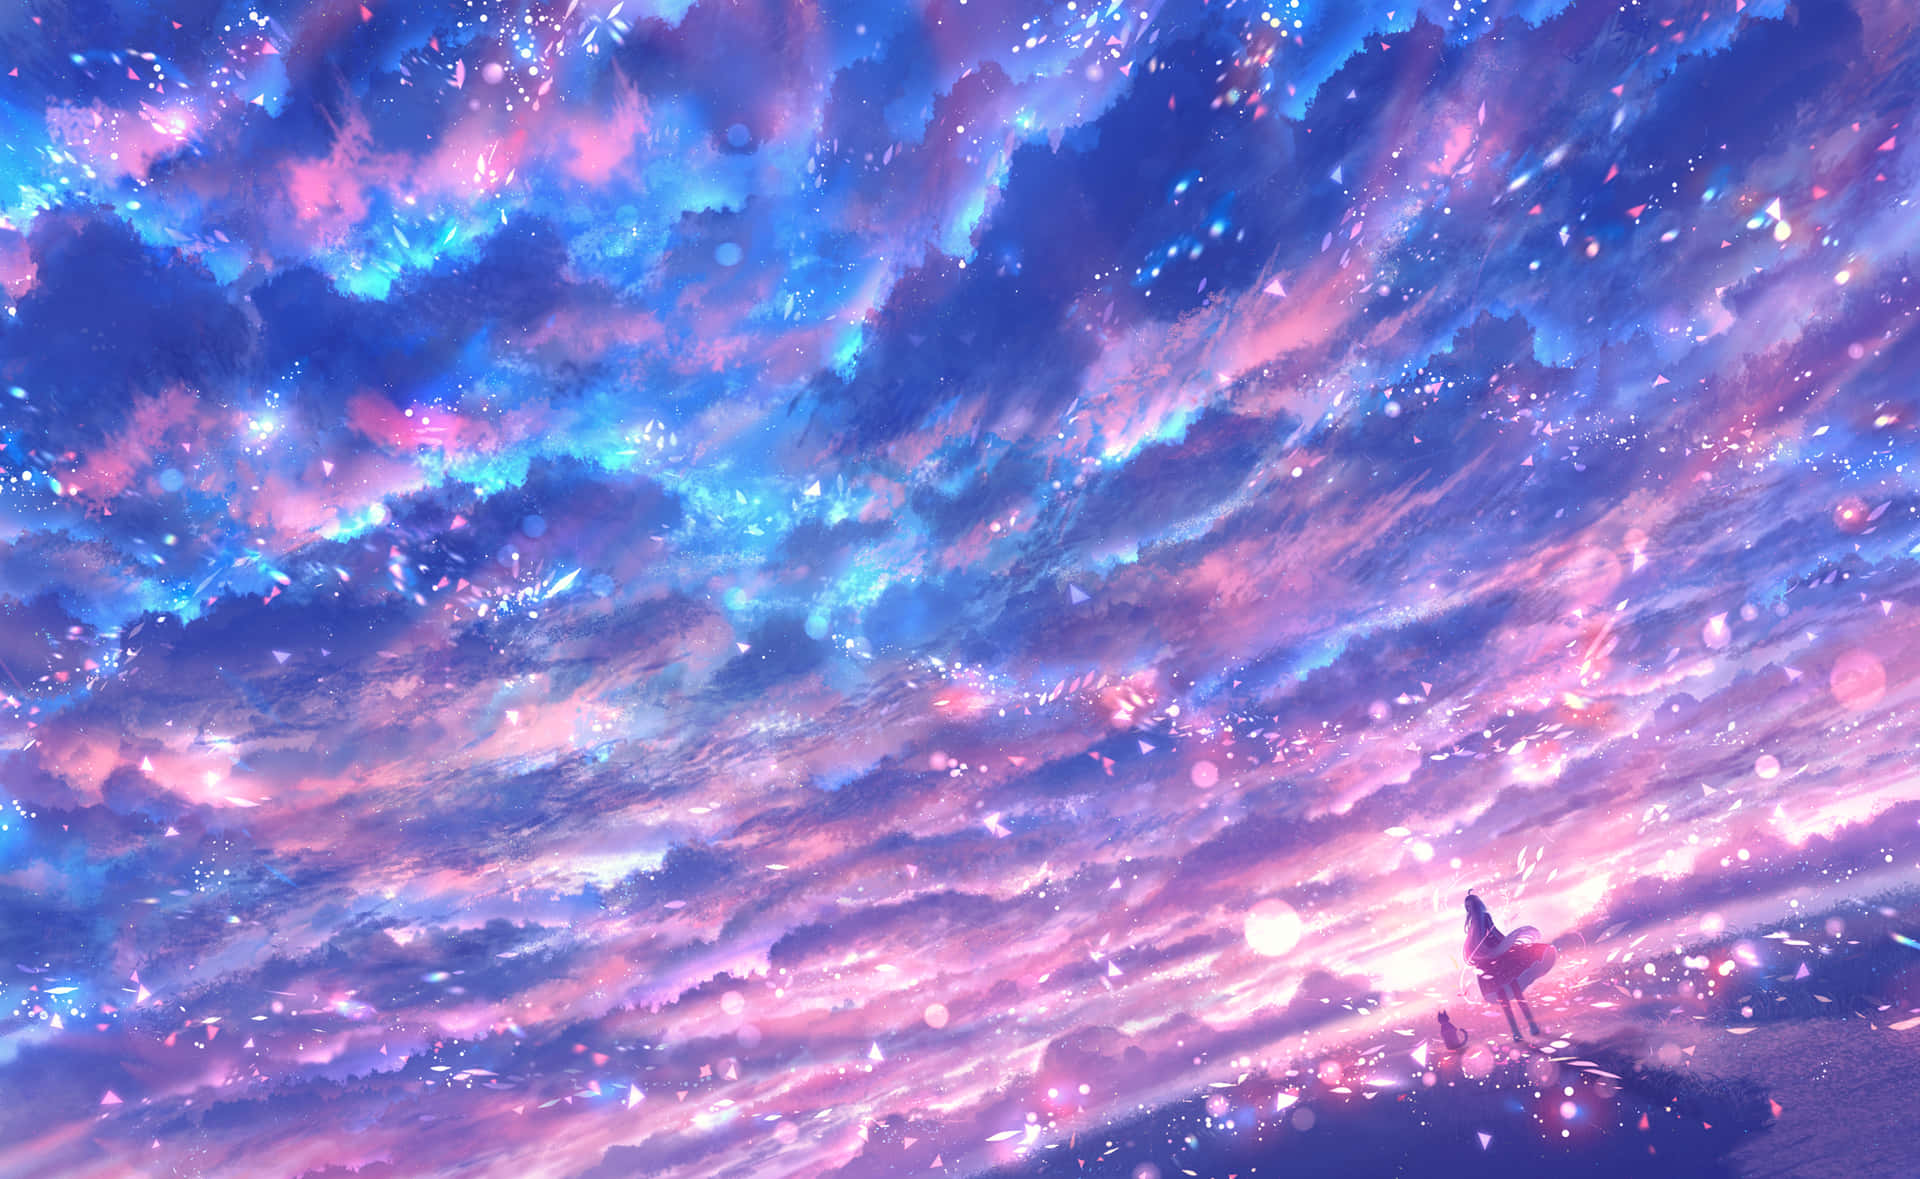 Tutorial: Anime style clouds and starry nightsky in blender - YouTube